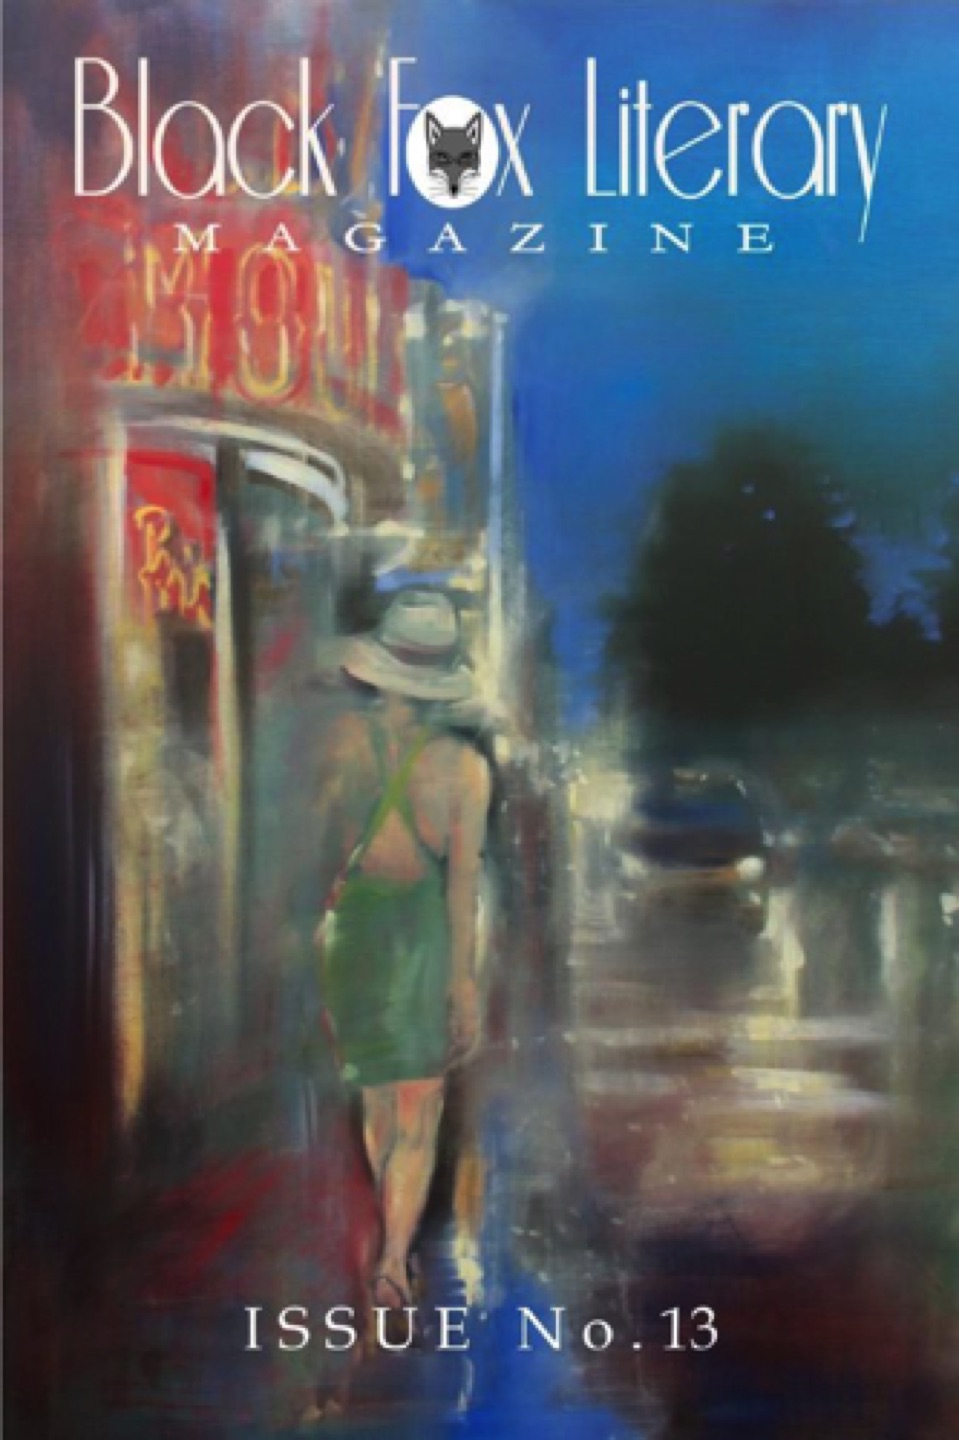 Gregg Chadwick’s Painting Pigalle Featured on the Cover of Black Fox Literary Magazine, Issue No. 13